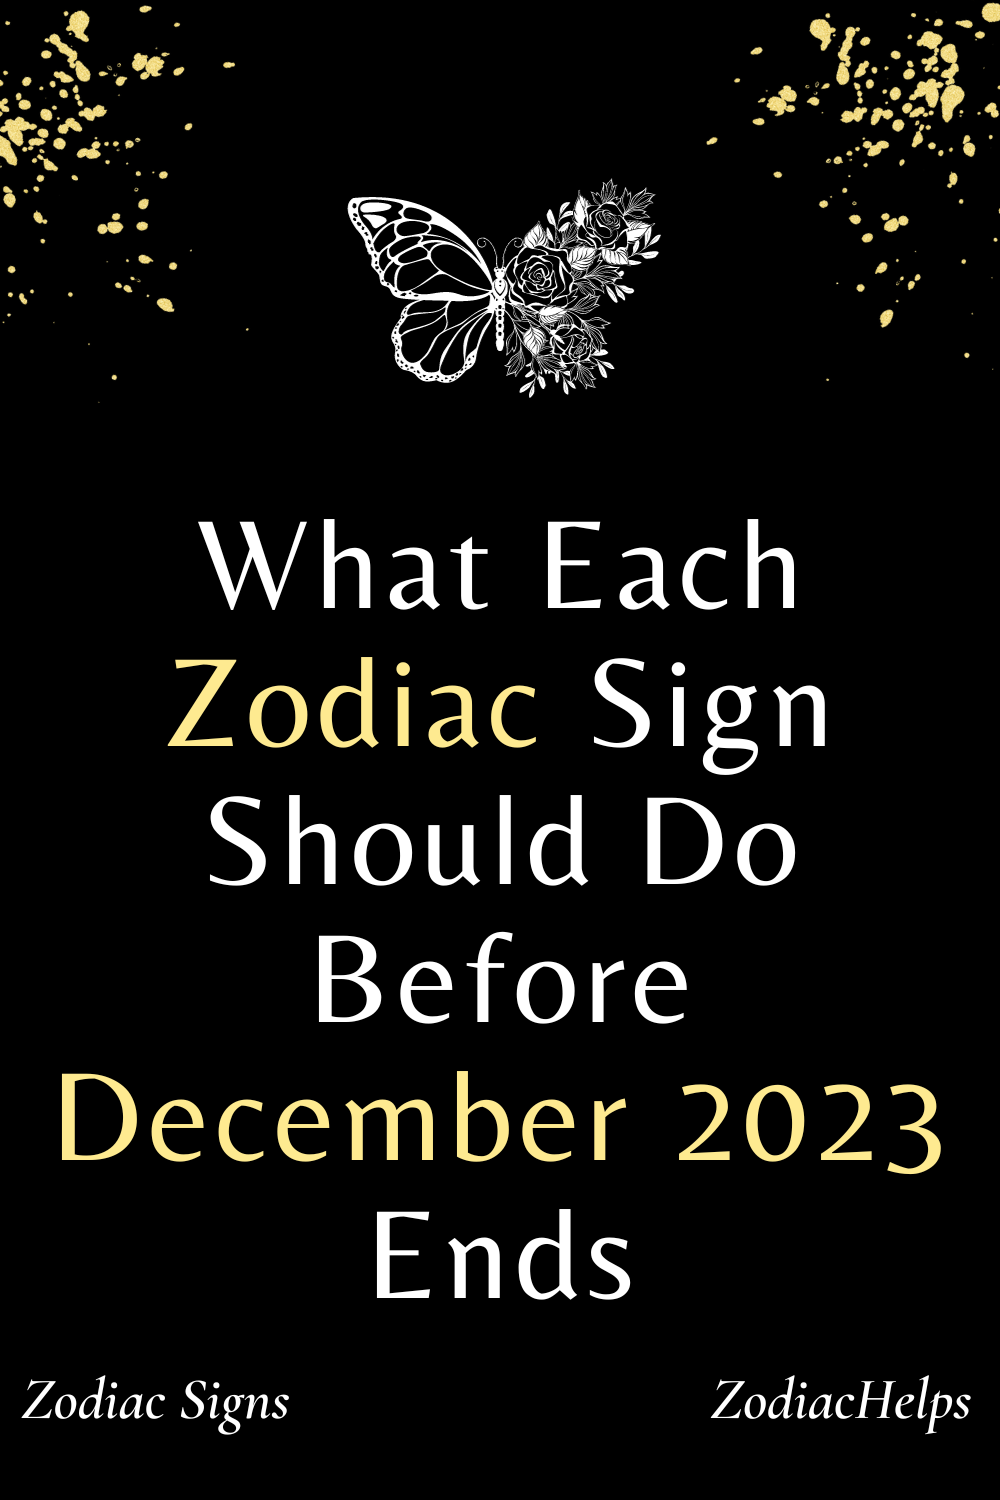 What Each Zodiac Sign Should Do Before December 2023 Ends